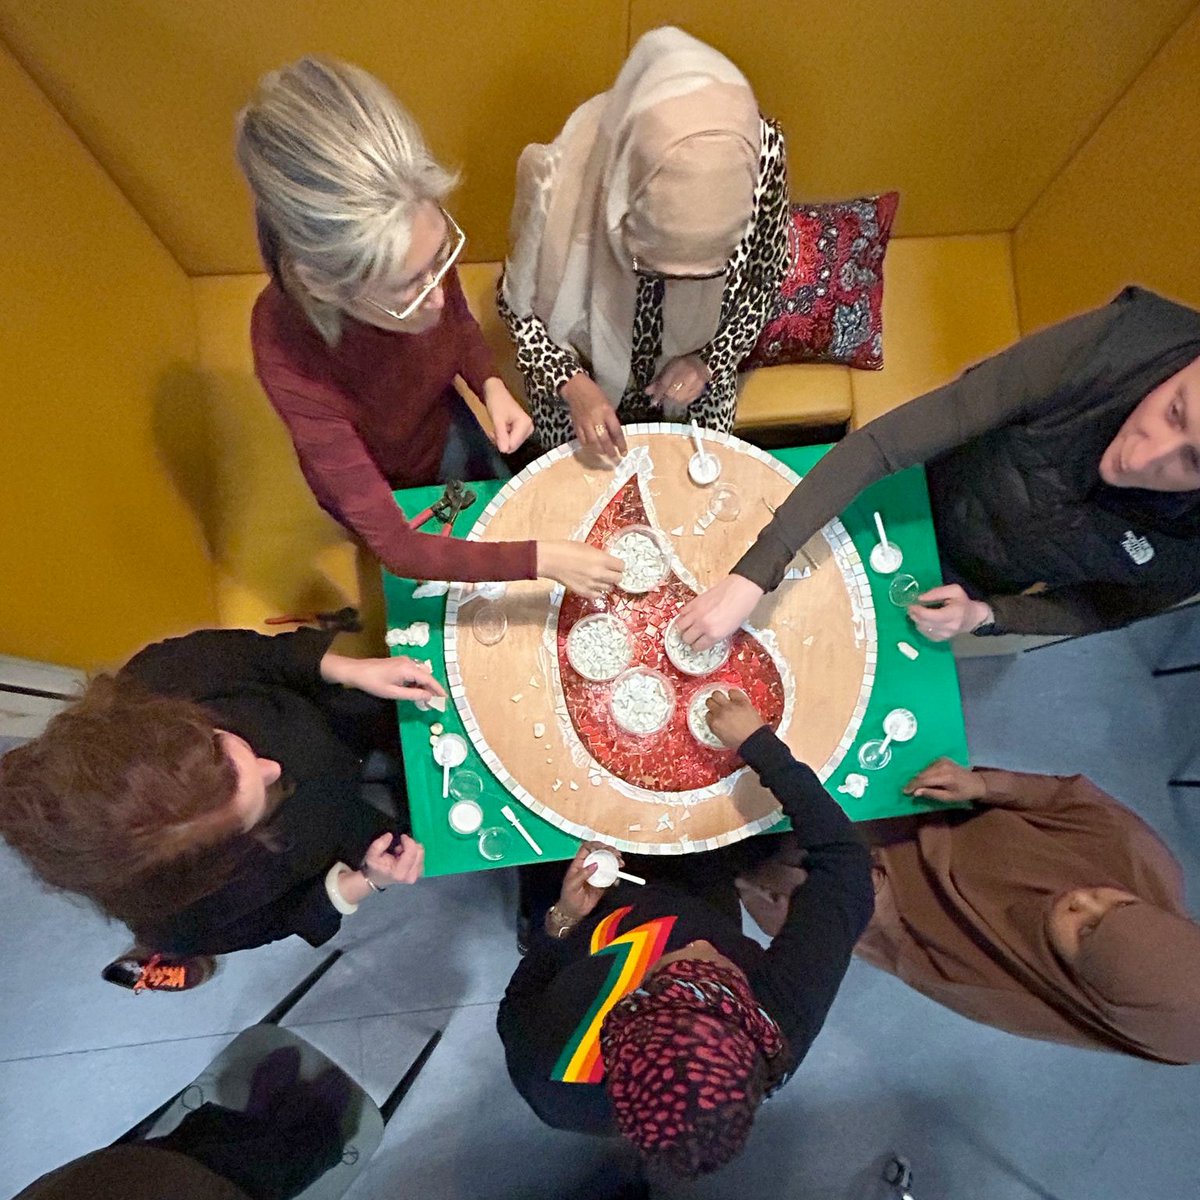 Making a meal out of mosaic for engagement in women's health research!  Creating a logo and conjuring conversations about viruses in pregnancy 🩸#BloodinAction #BiaProject #CreativeEngagement #Mosaic #ArtsinHealth @TheBridgeW12 @InventionRooms 
🩸🩸🩸🩸🩸🩸🩸🩸🩸🩸🩸🩸🩸🩸🩸